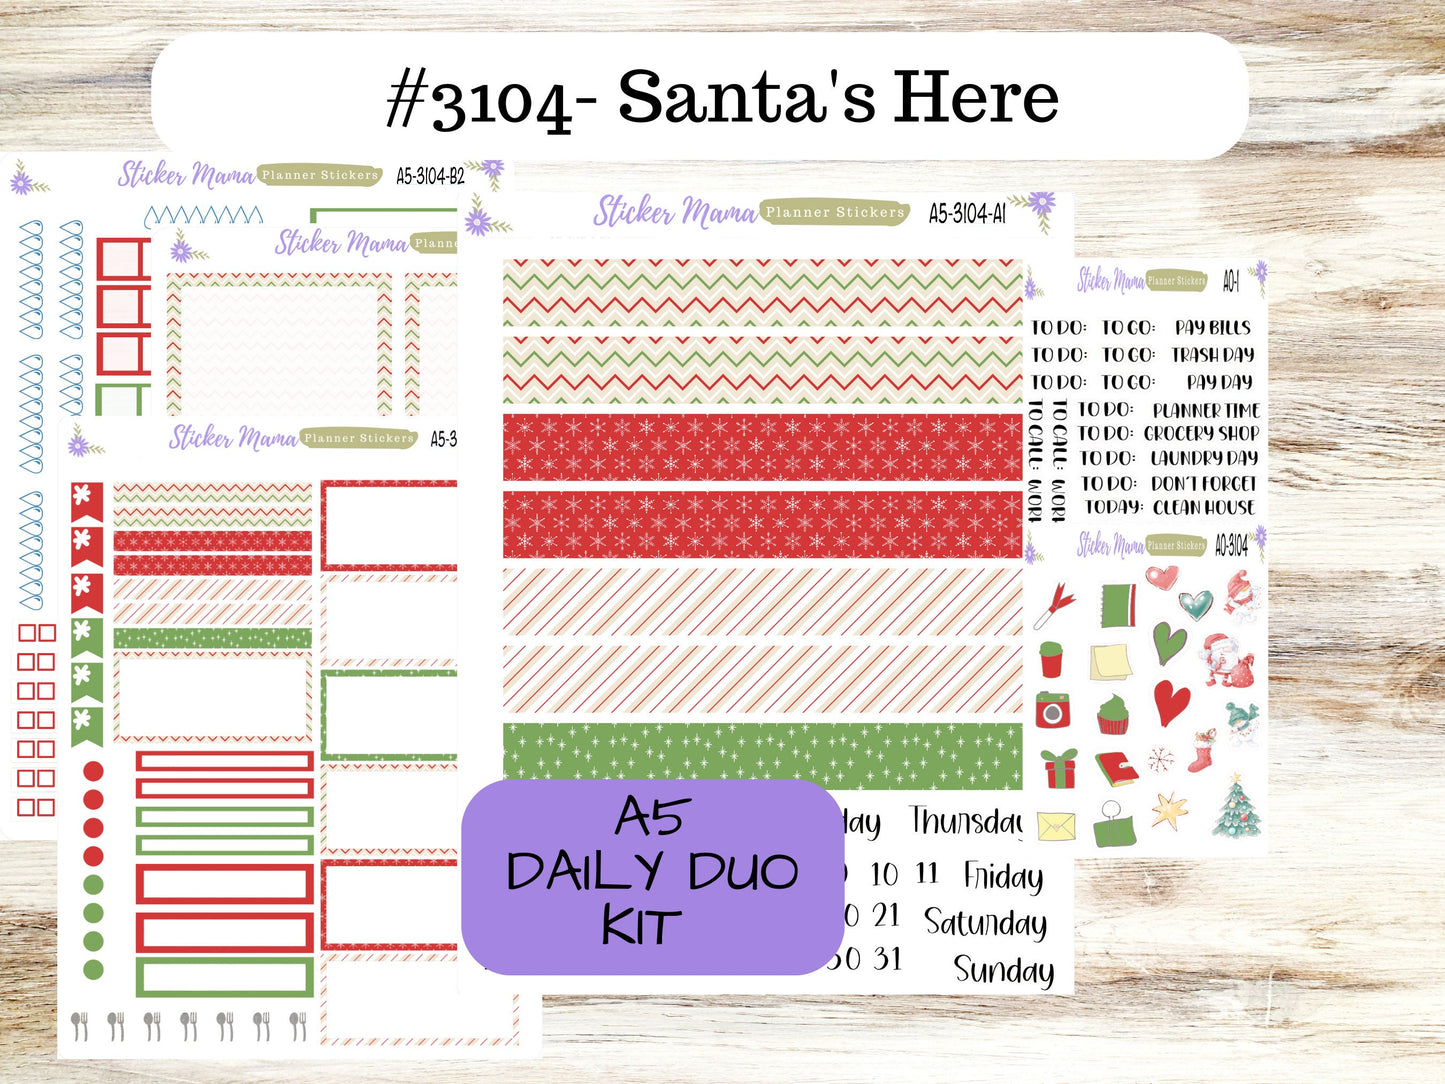 A5-DAILY DUO-Kit #3104 || Santa's Here || Planner Stickers - Daily Duo A5 Planner - Daily Duo Stickers - Daily Planner